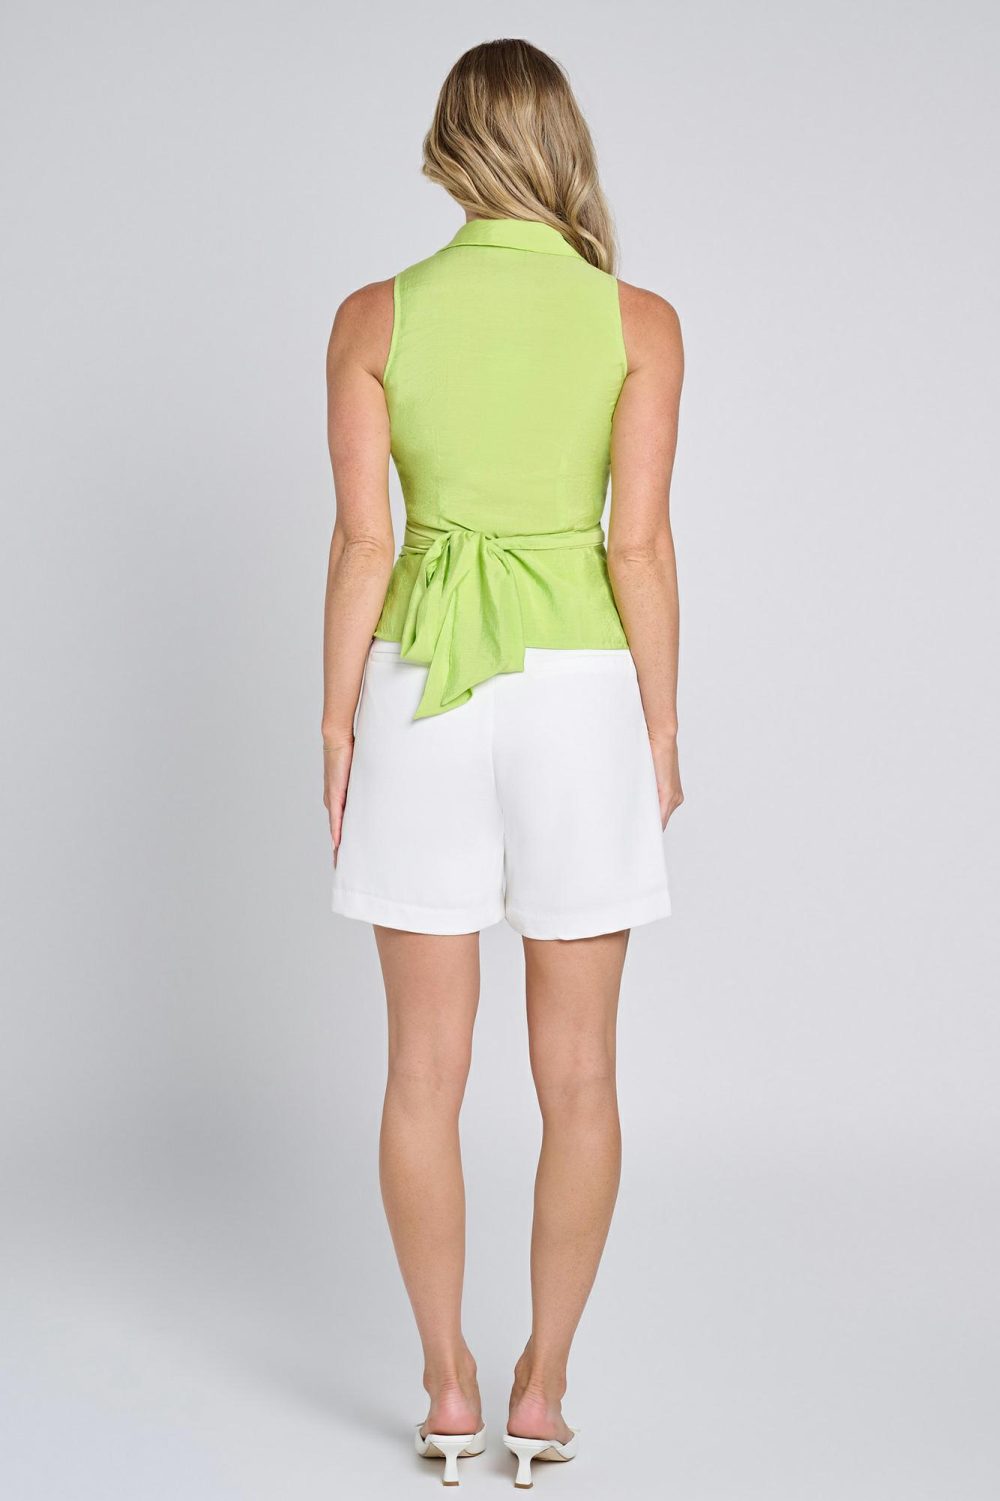 Ladies Top Colour is Lime